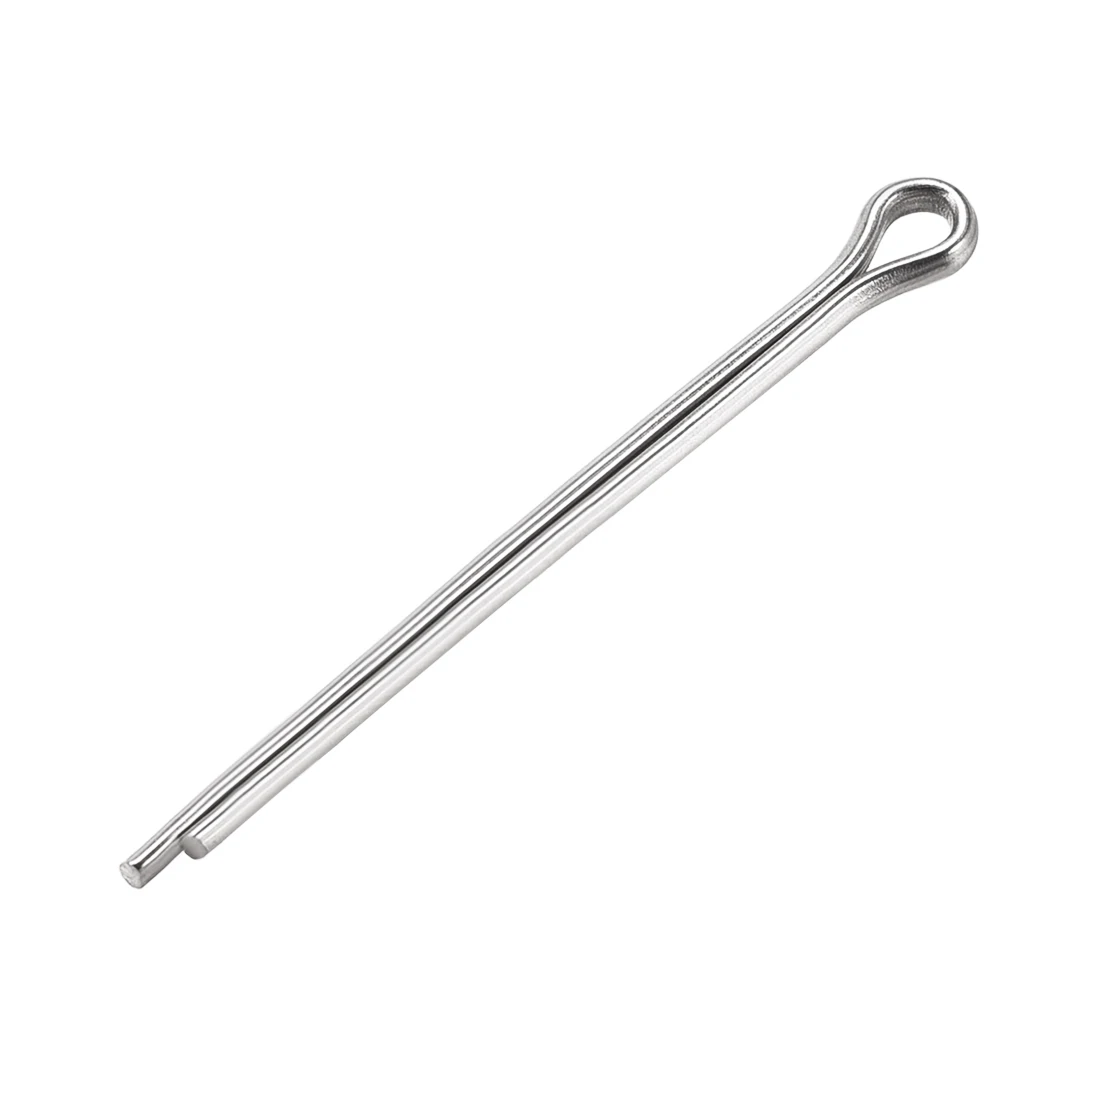 

uxcell 60Pcs Split Cotter Pin - 2mm x 30mm 304 Stainless Steel 2-Prongs Silver Tone for Secure Clevis Pins,Castle Nuts